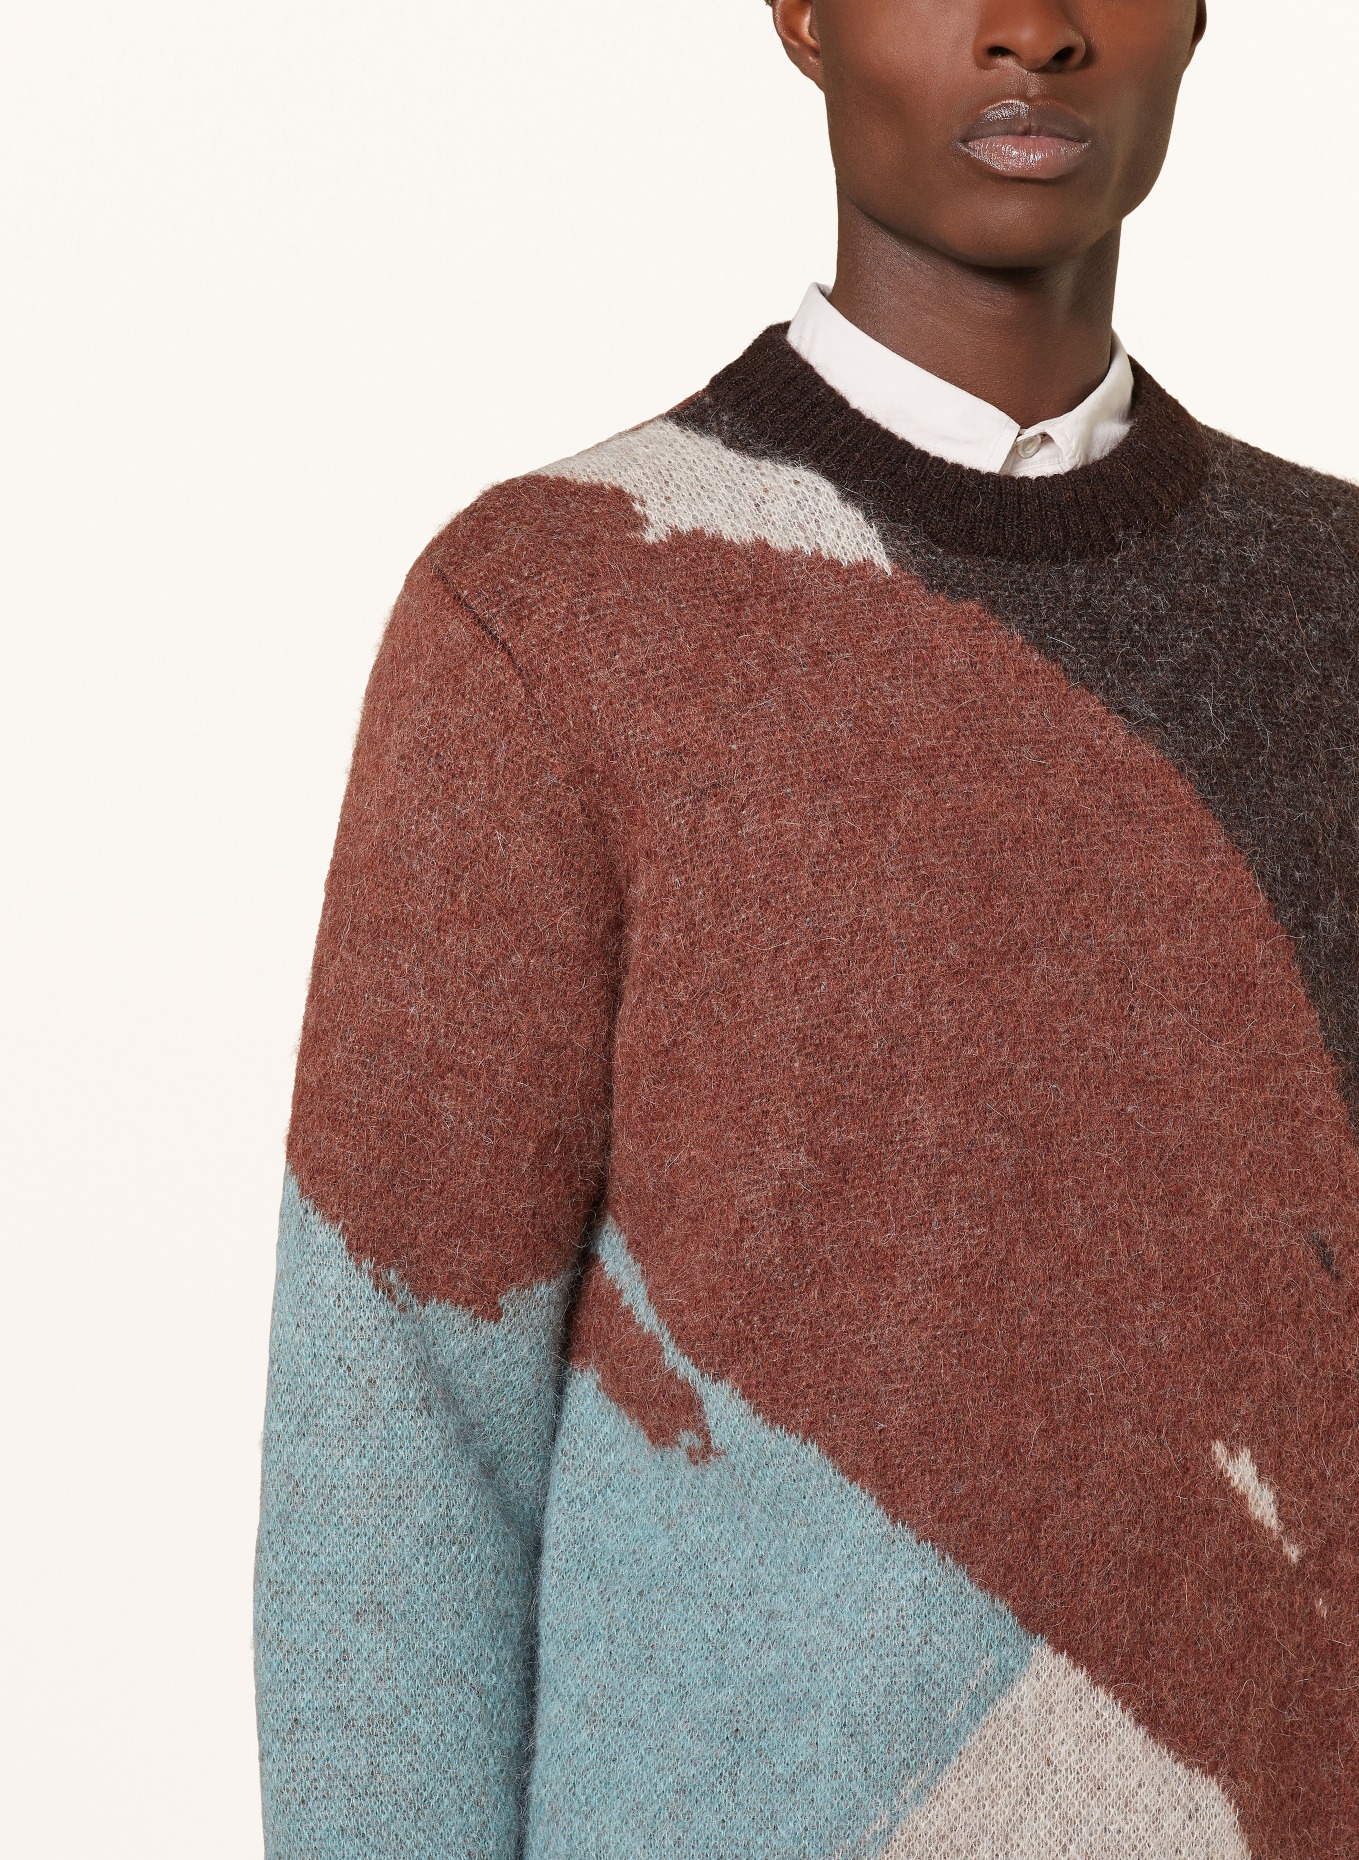 NORSE PROJECTS Sweater ARLID with alpaca and mohair, Color: DARK BROWN/ BEIGE/ MINT (Image 4)